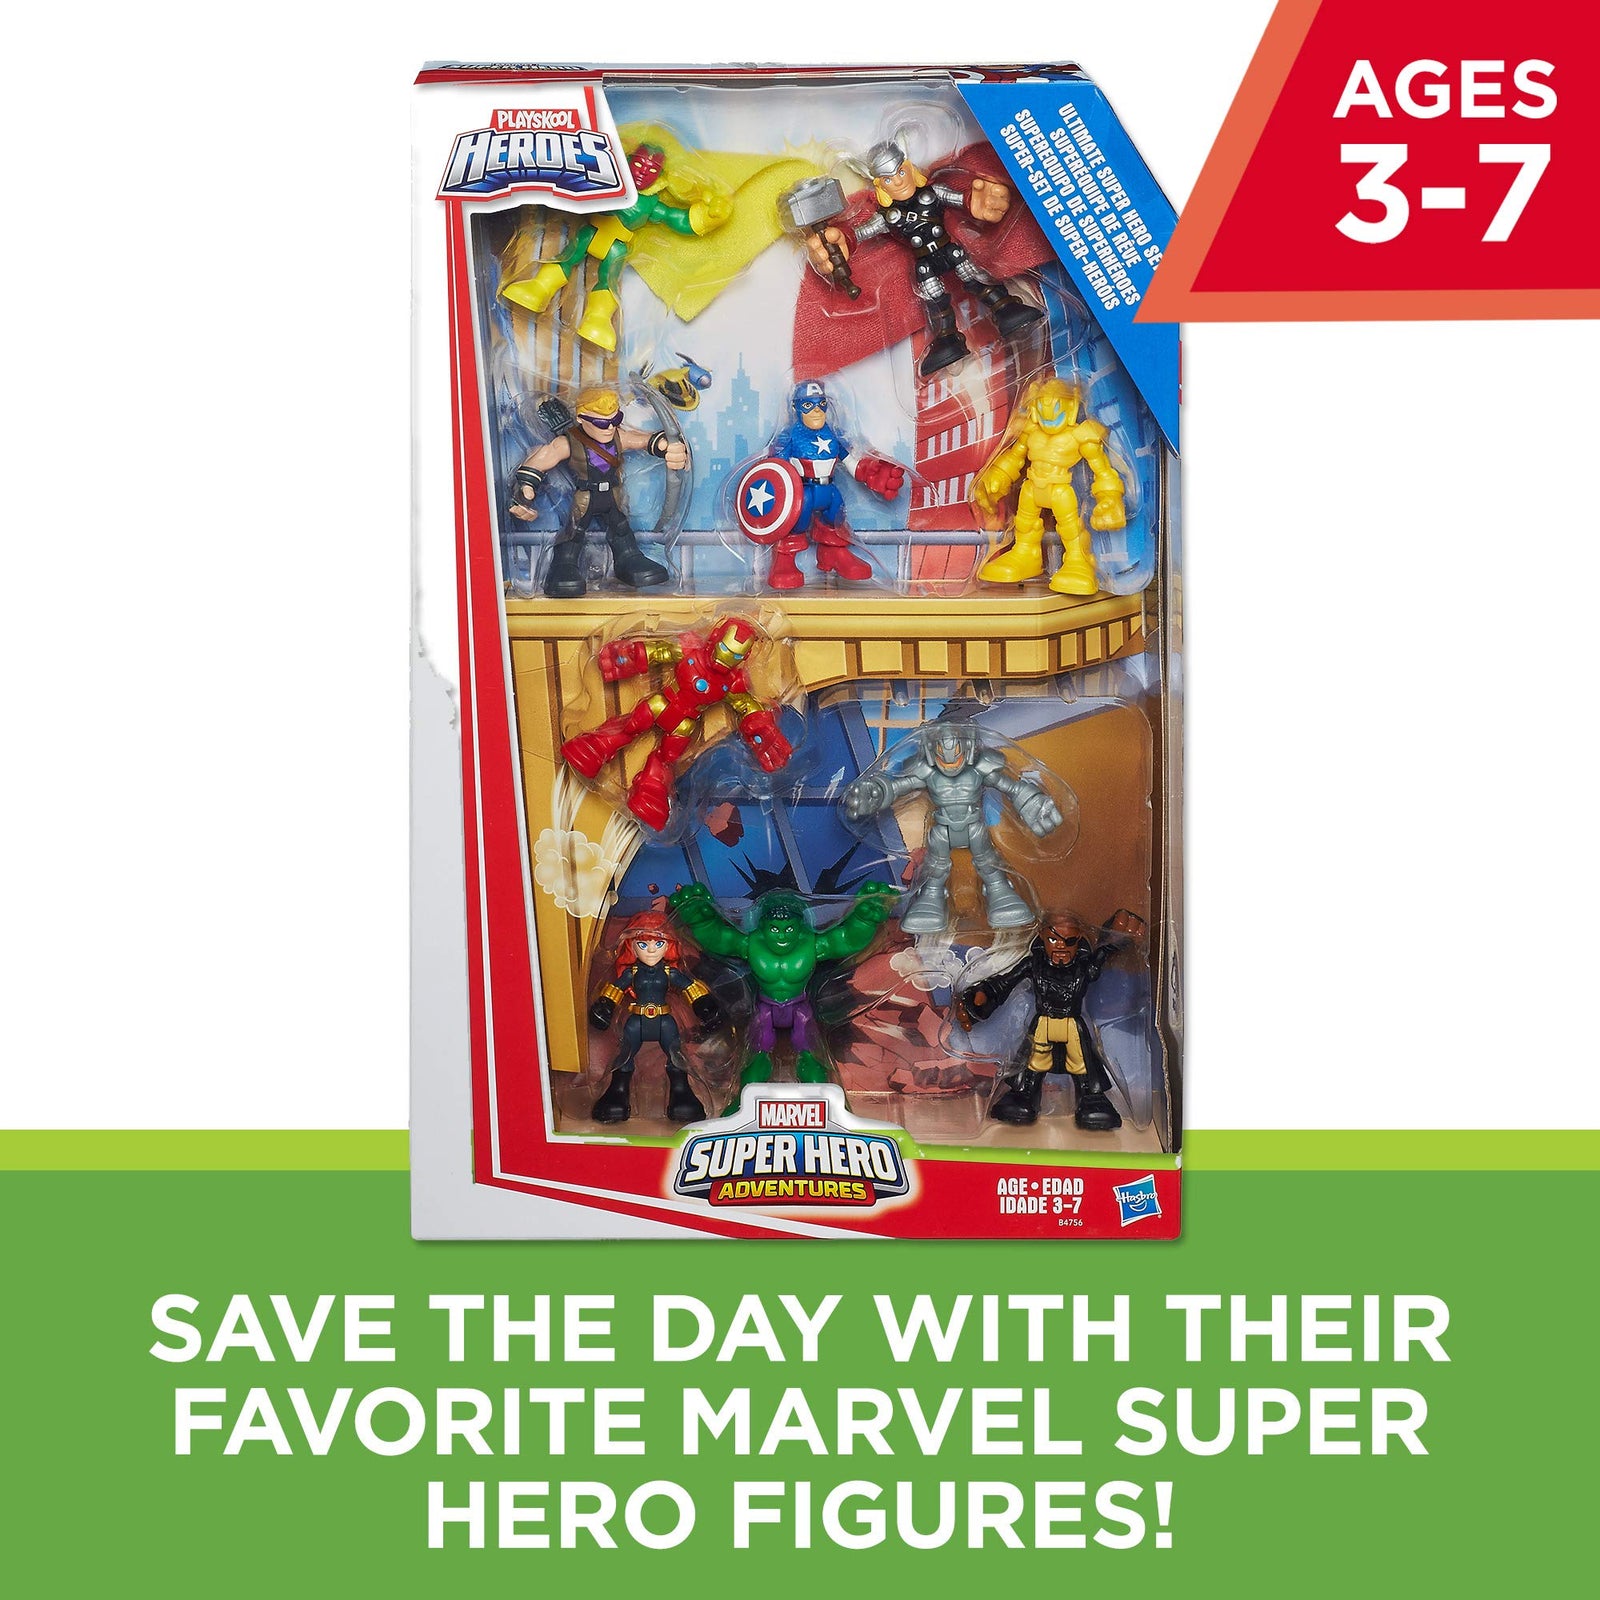 Playskool Heroes Marvel Super Hero Adventures Ultimate Super Hero Set, 10 Collectible 2.5-Inch Action Figures, Toys for Kids Ages 3 and Up (Amazon Exclusive)